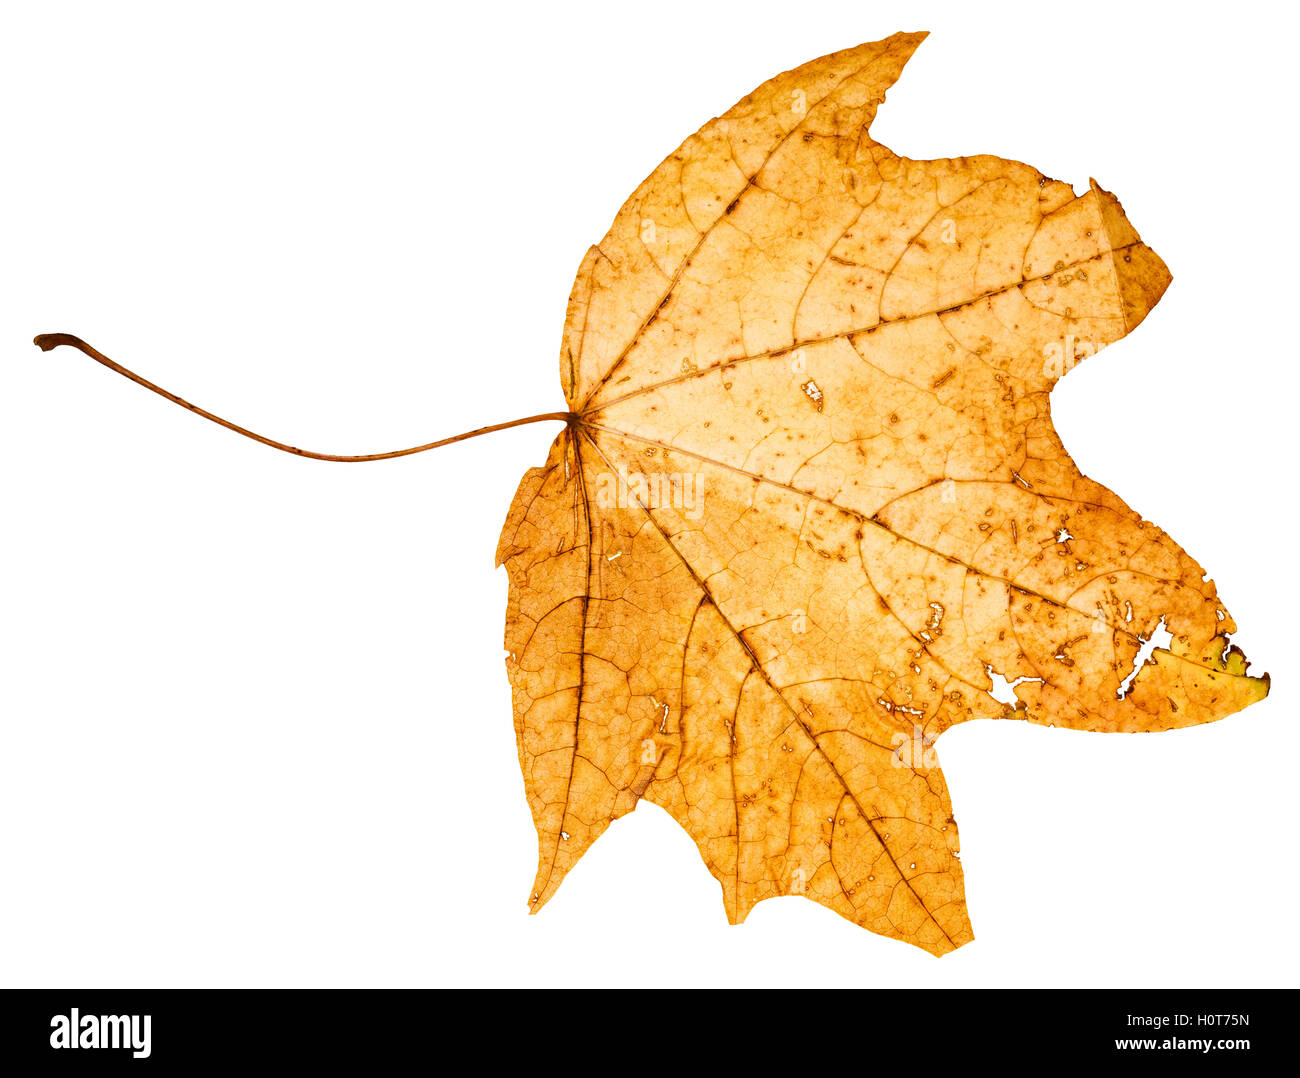 yellow dead leaf of maple tree (Acer platanoides, Norway maple) isolated on white background Stock Photo